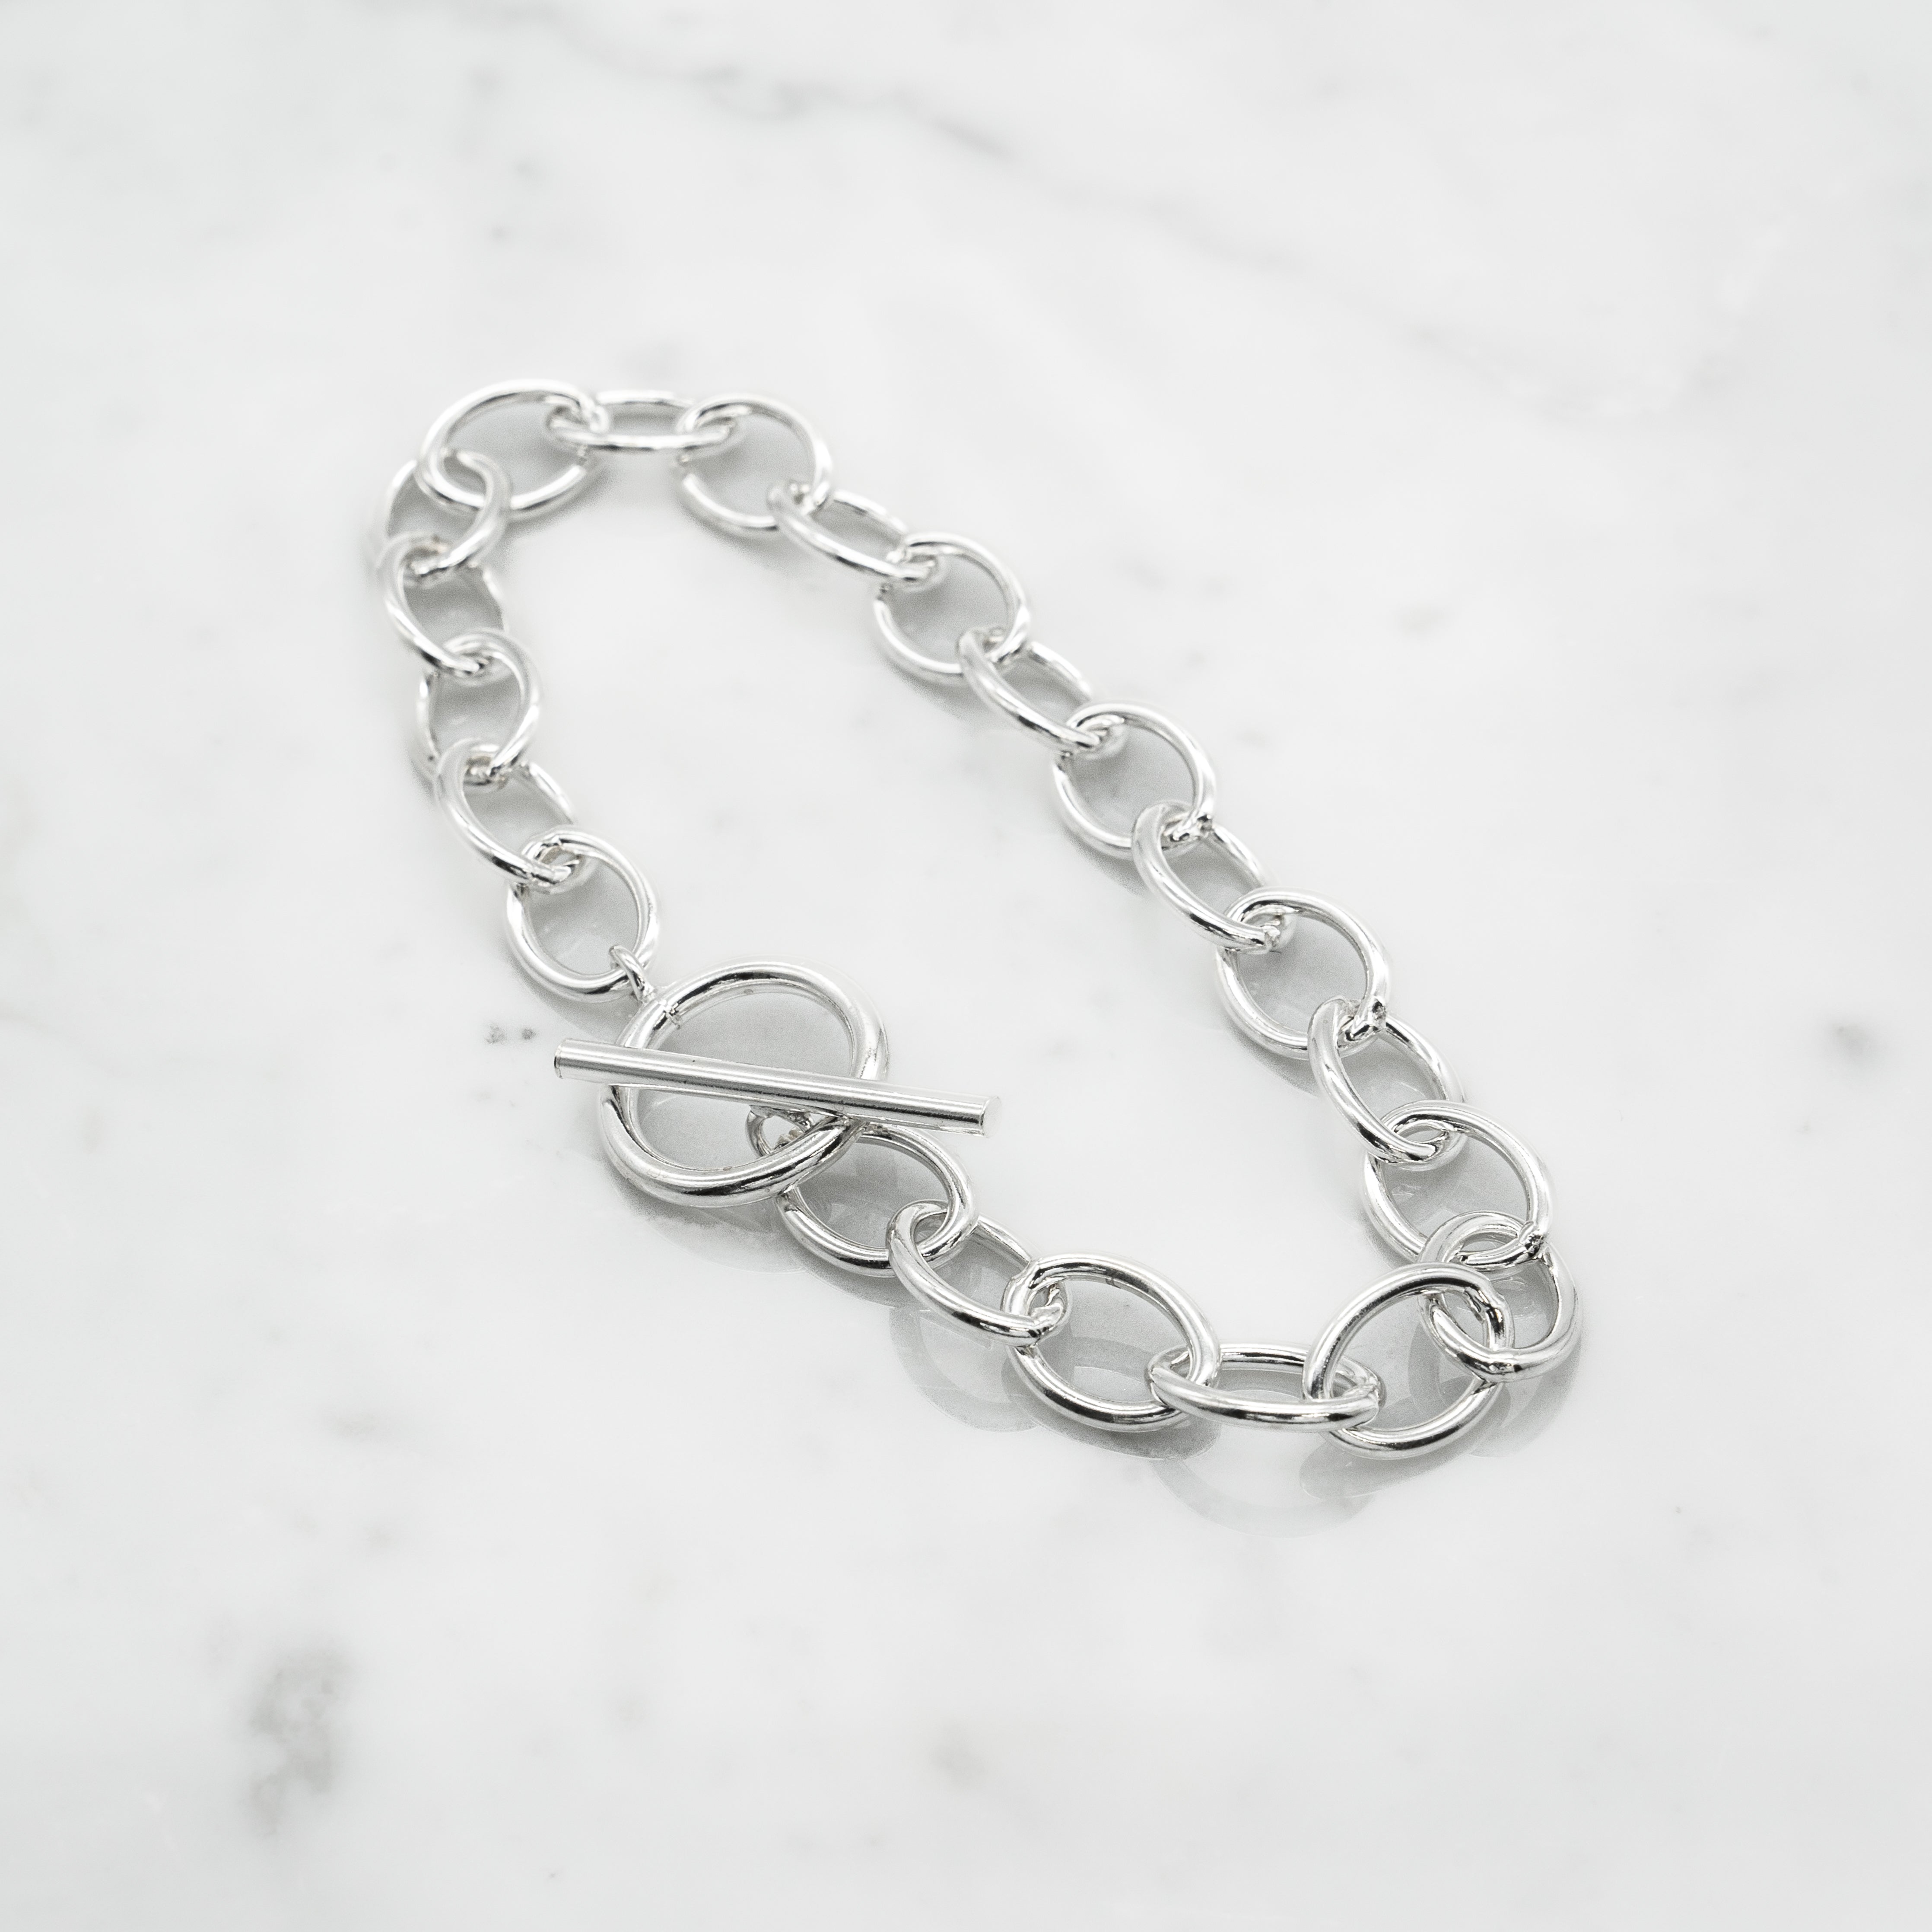 【Nothing And Others】Round Chain Bracelet